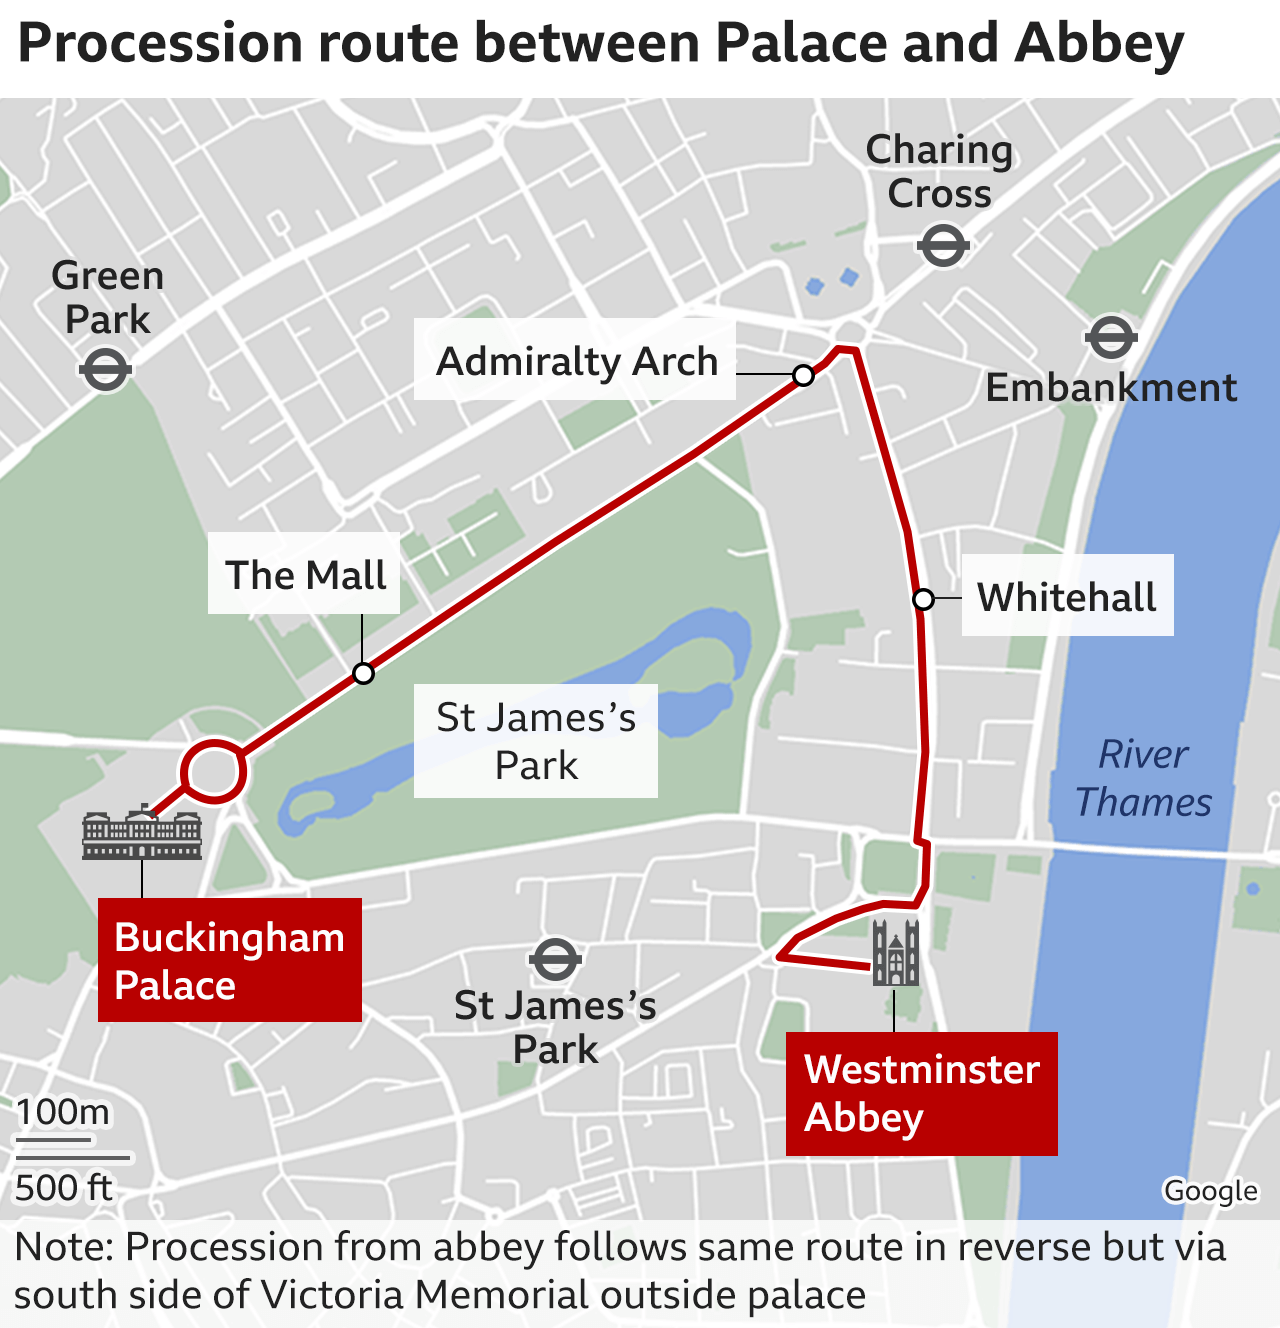 King Charles's procession route